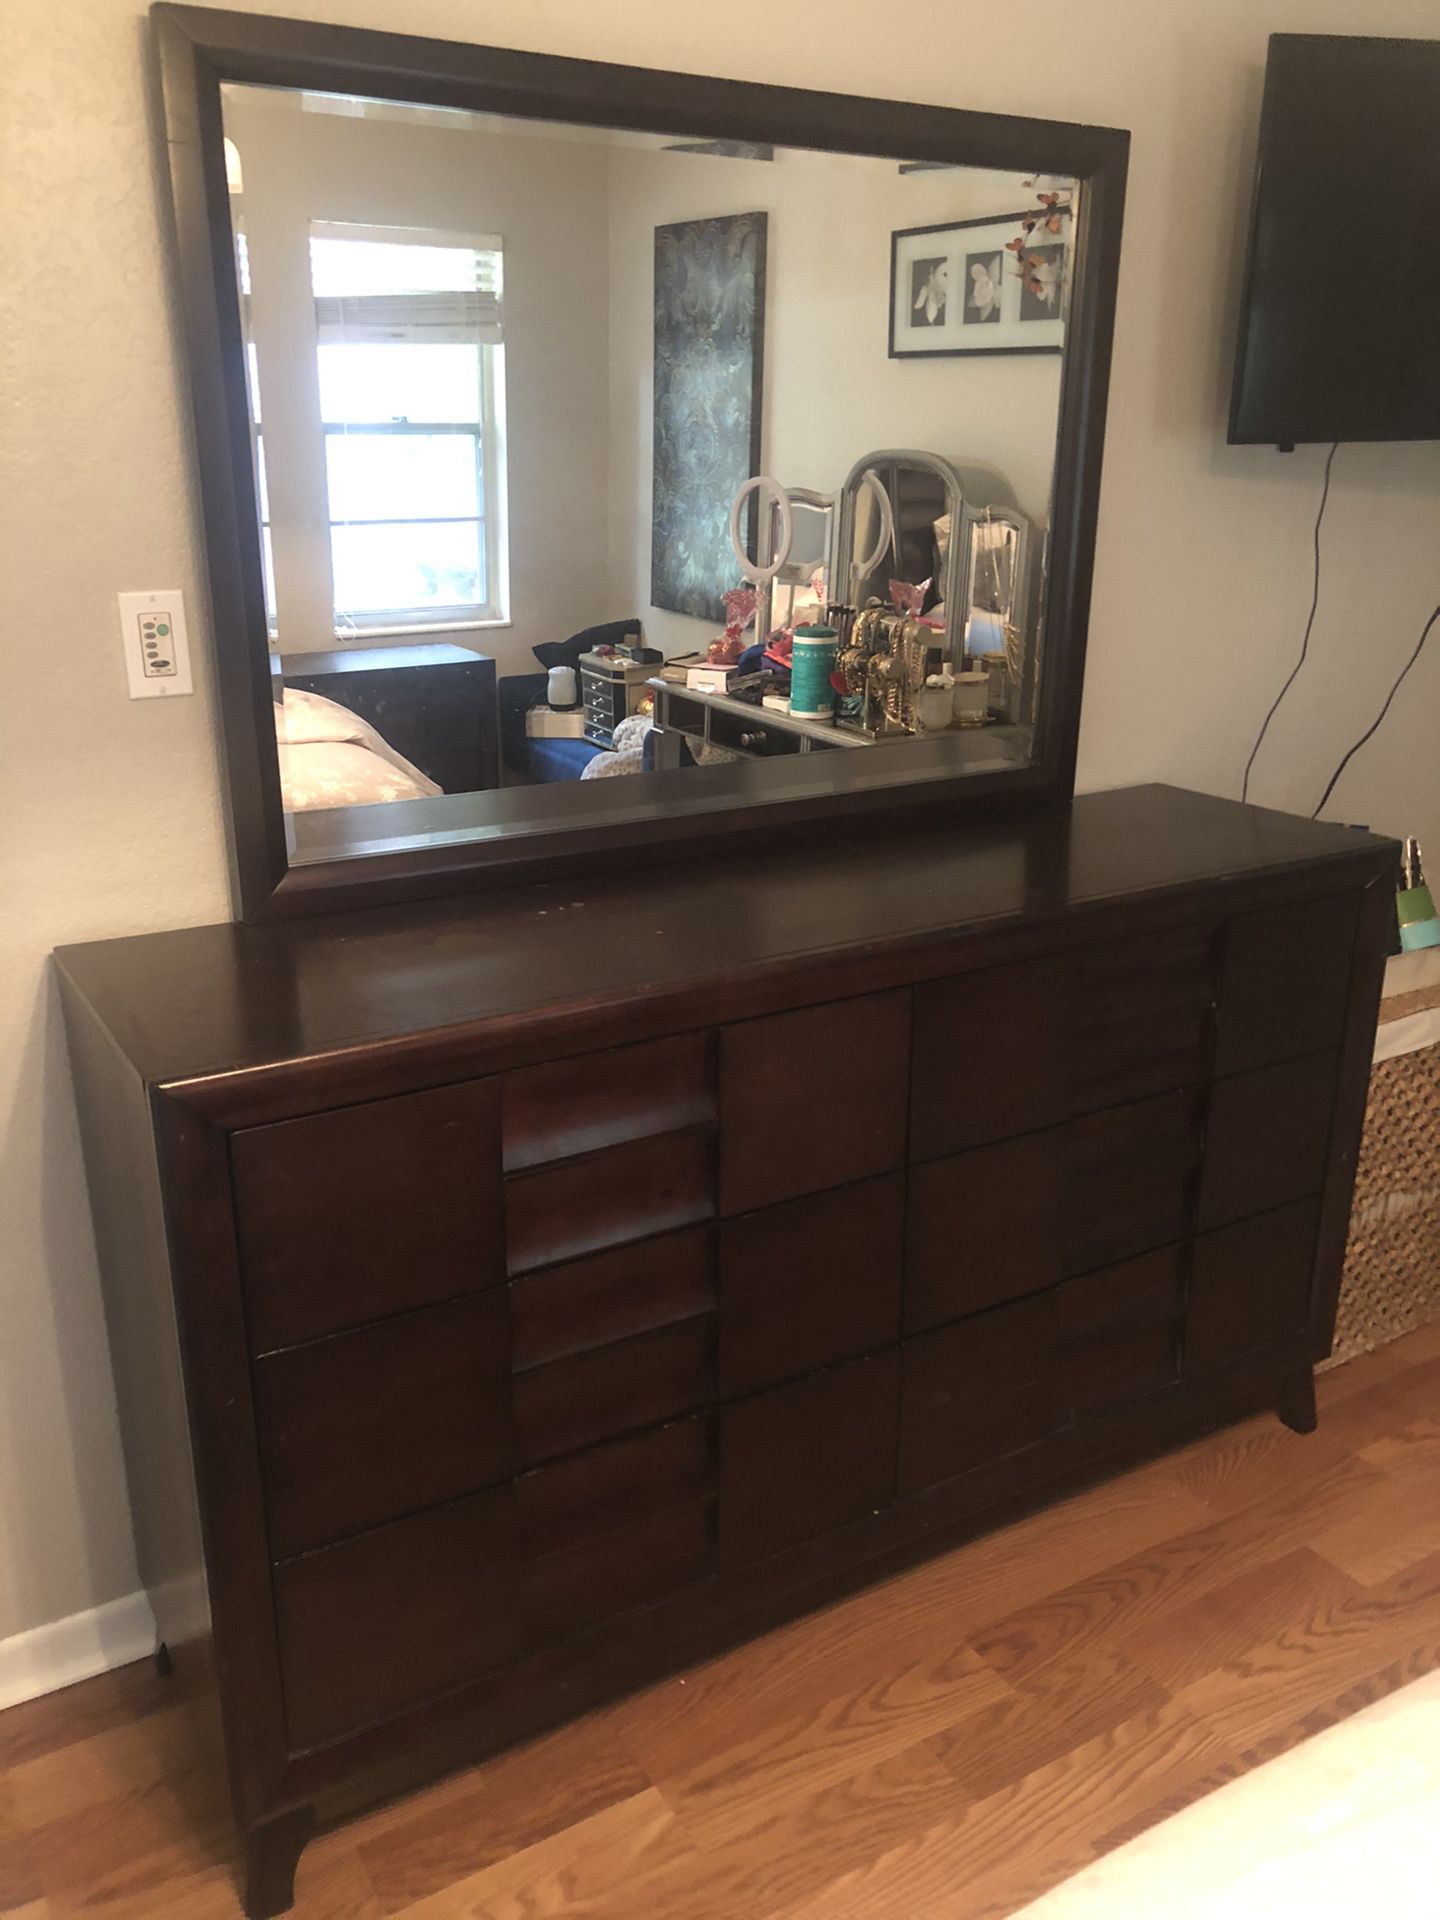 Queen bed frame, dresser, and 2 night stands